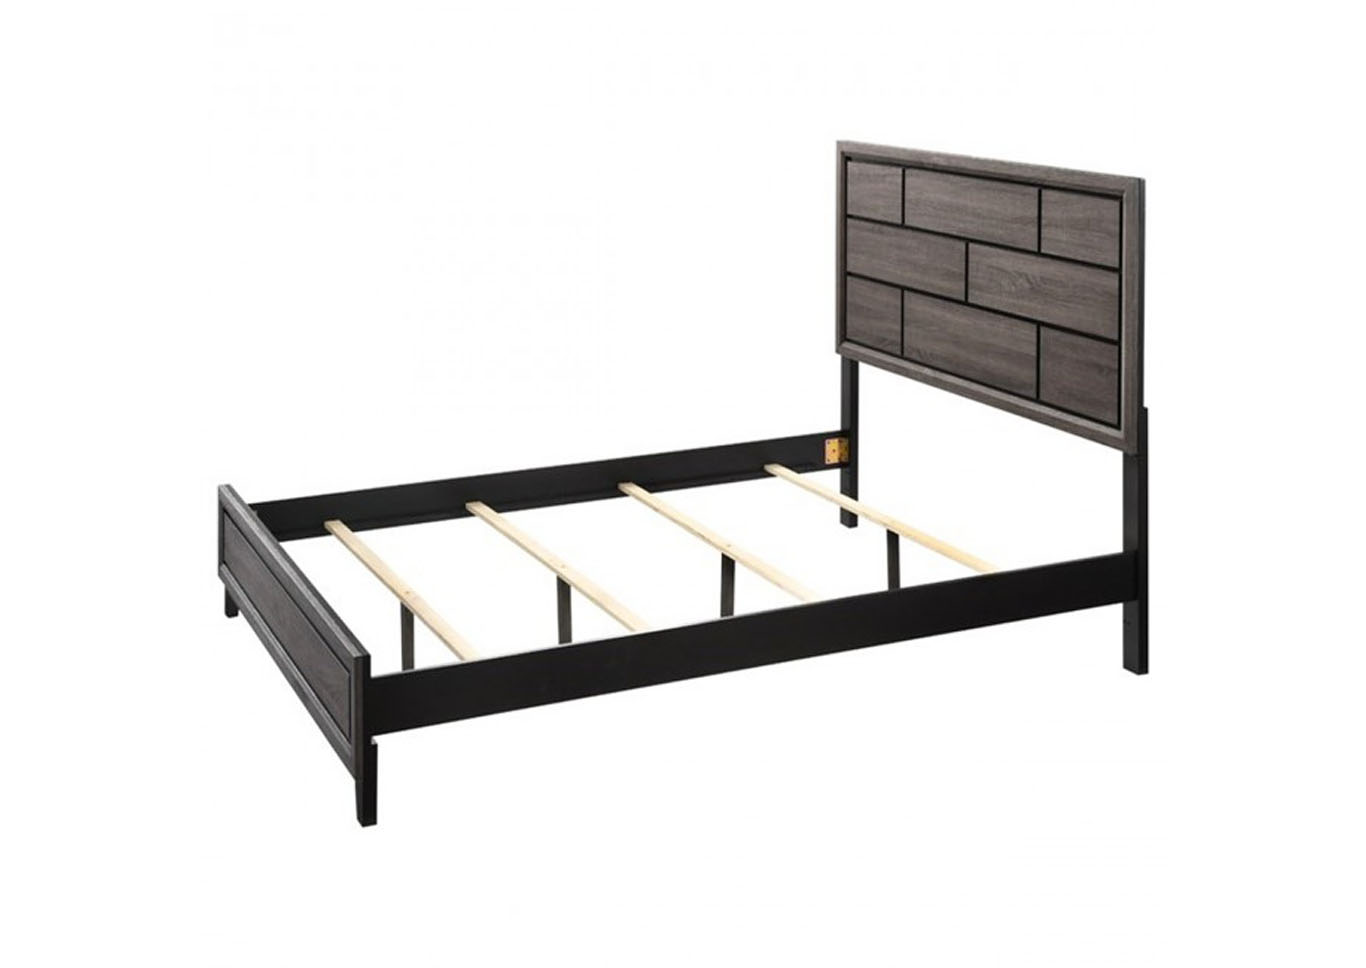 Akerson Panel Bed - Twin,Instore